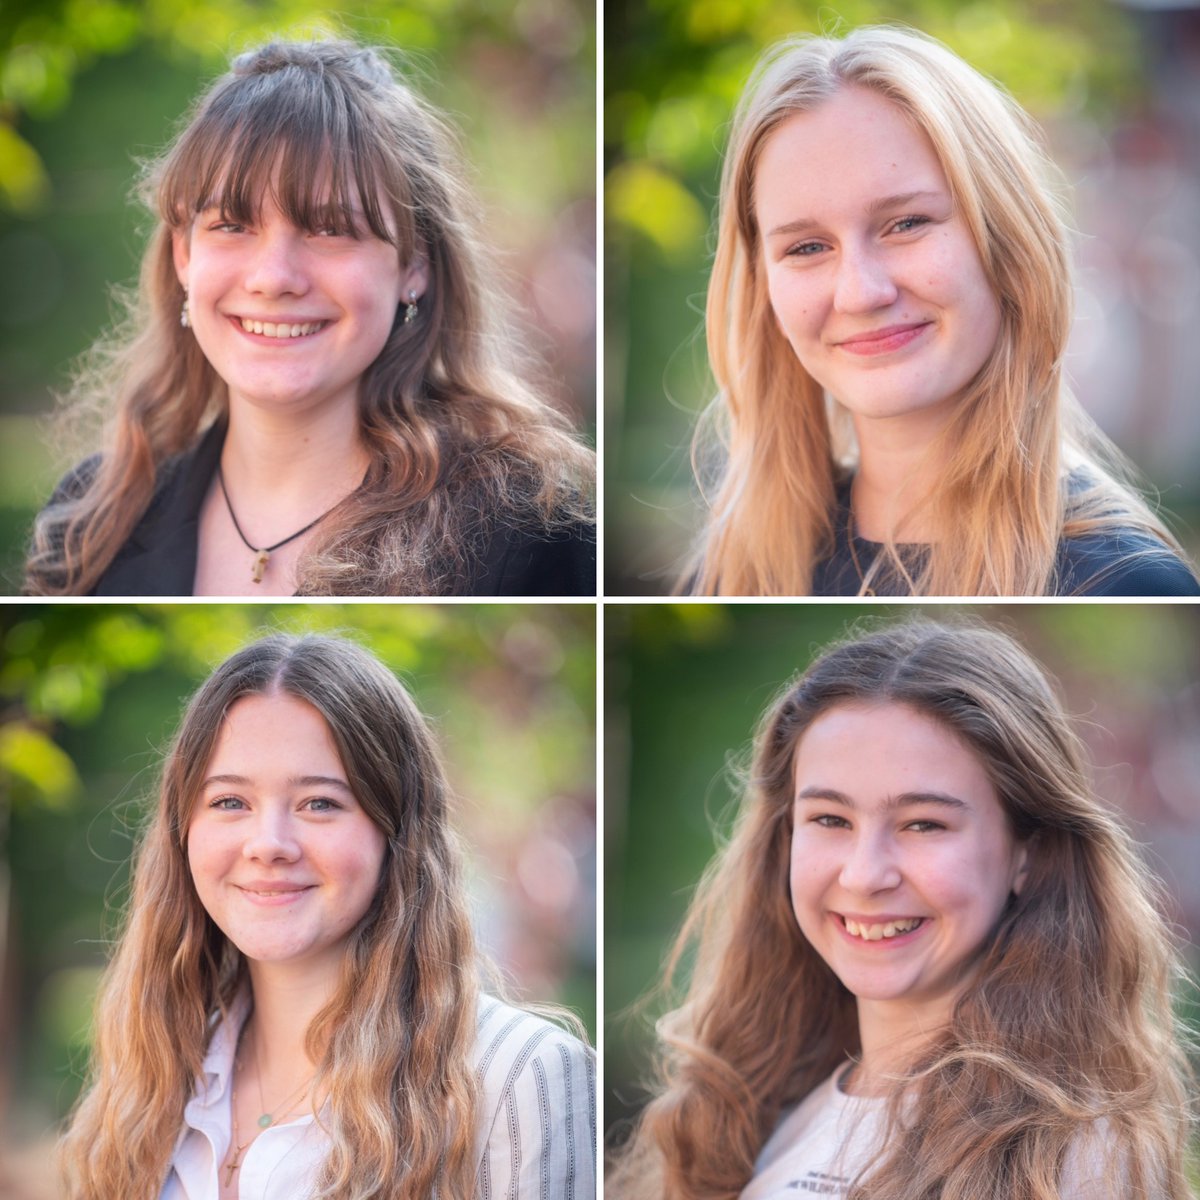 NATIONAL STAGE @wellingtonsch1 is delighted to announce that four students have been accepted into the prestigious National Youth Theatre. Read the full success story via this link: tinyurl.com/msa9pvmn